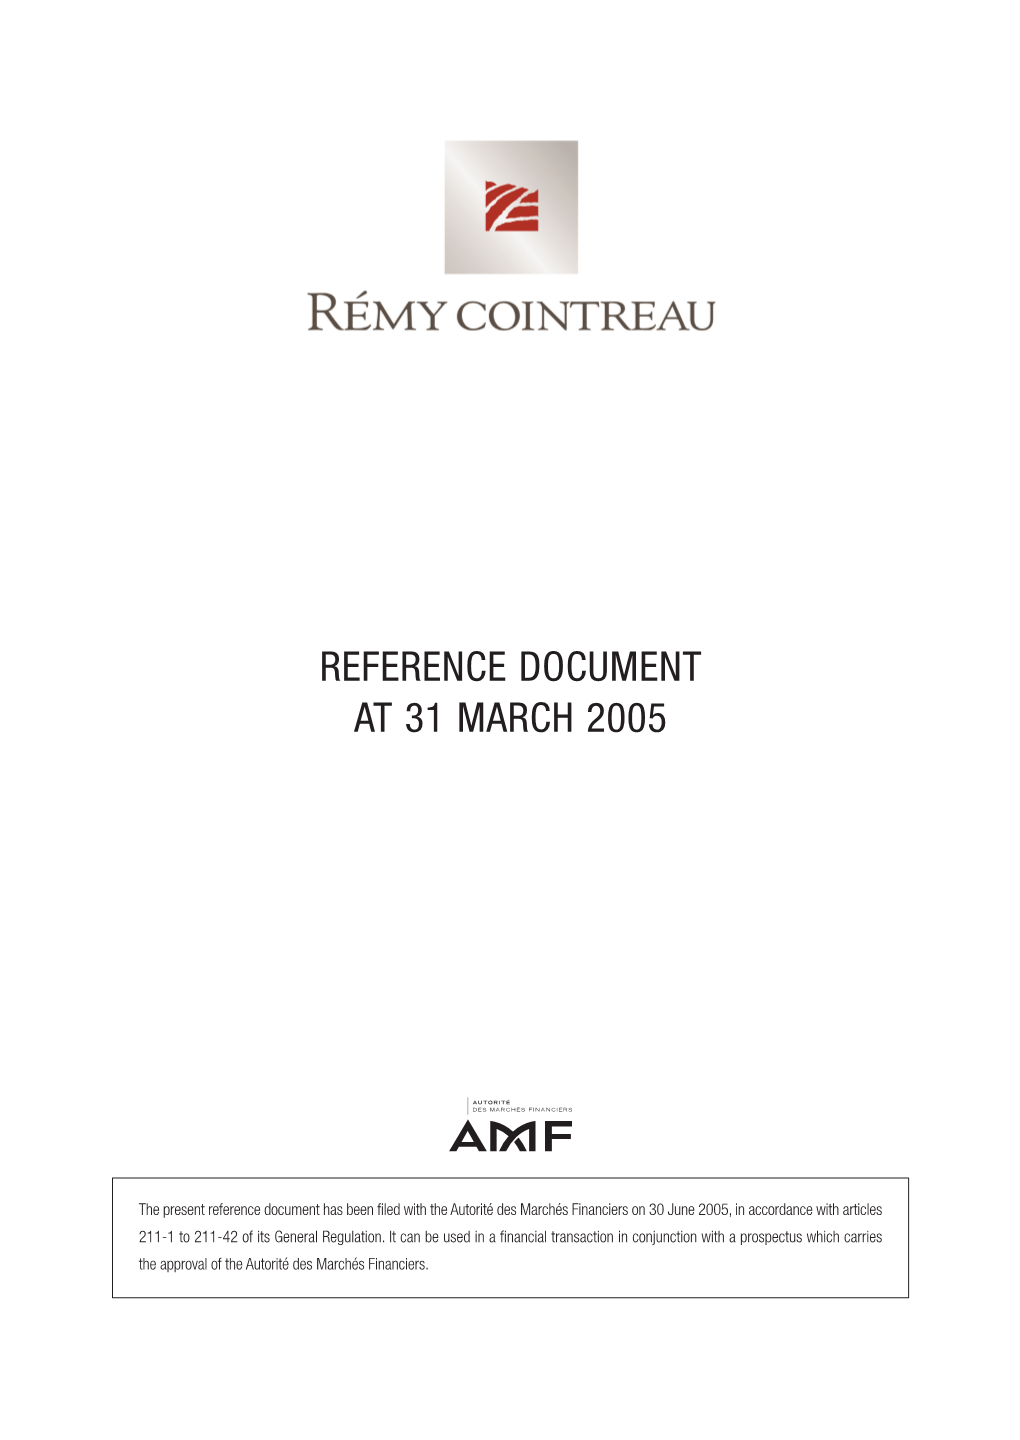 Reference Document at 31 March 2005